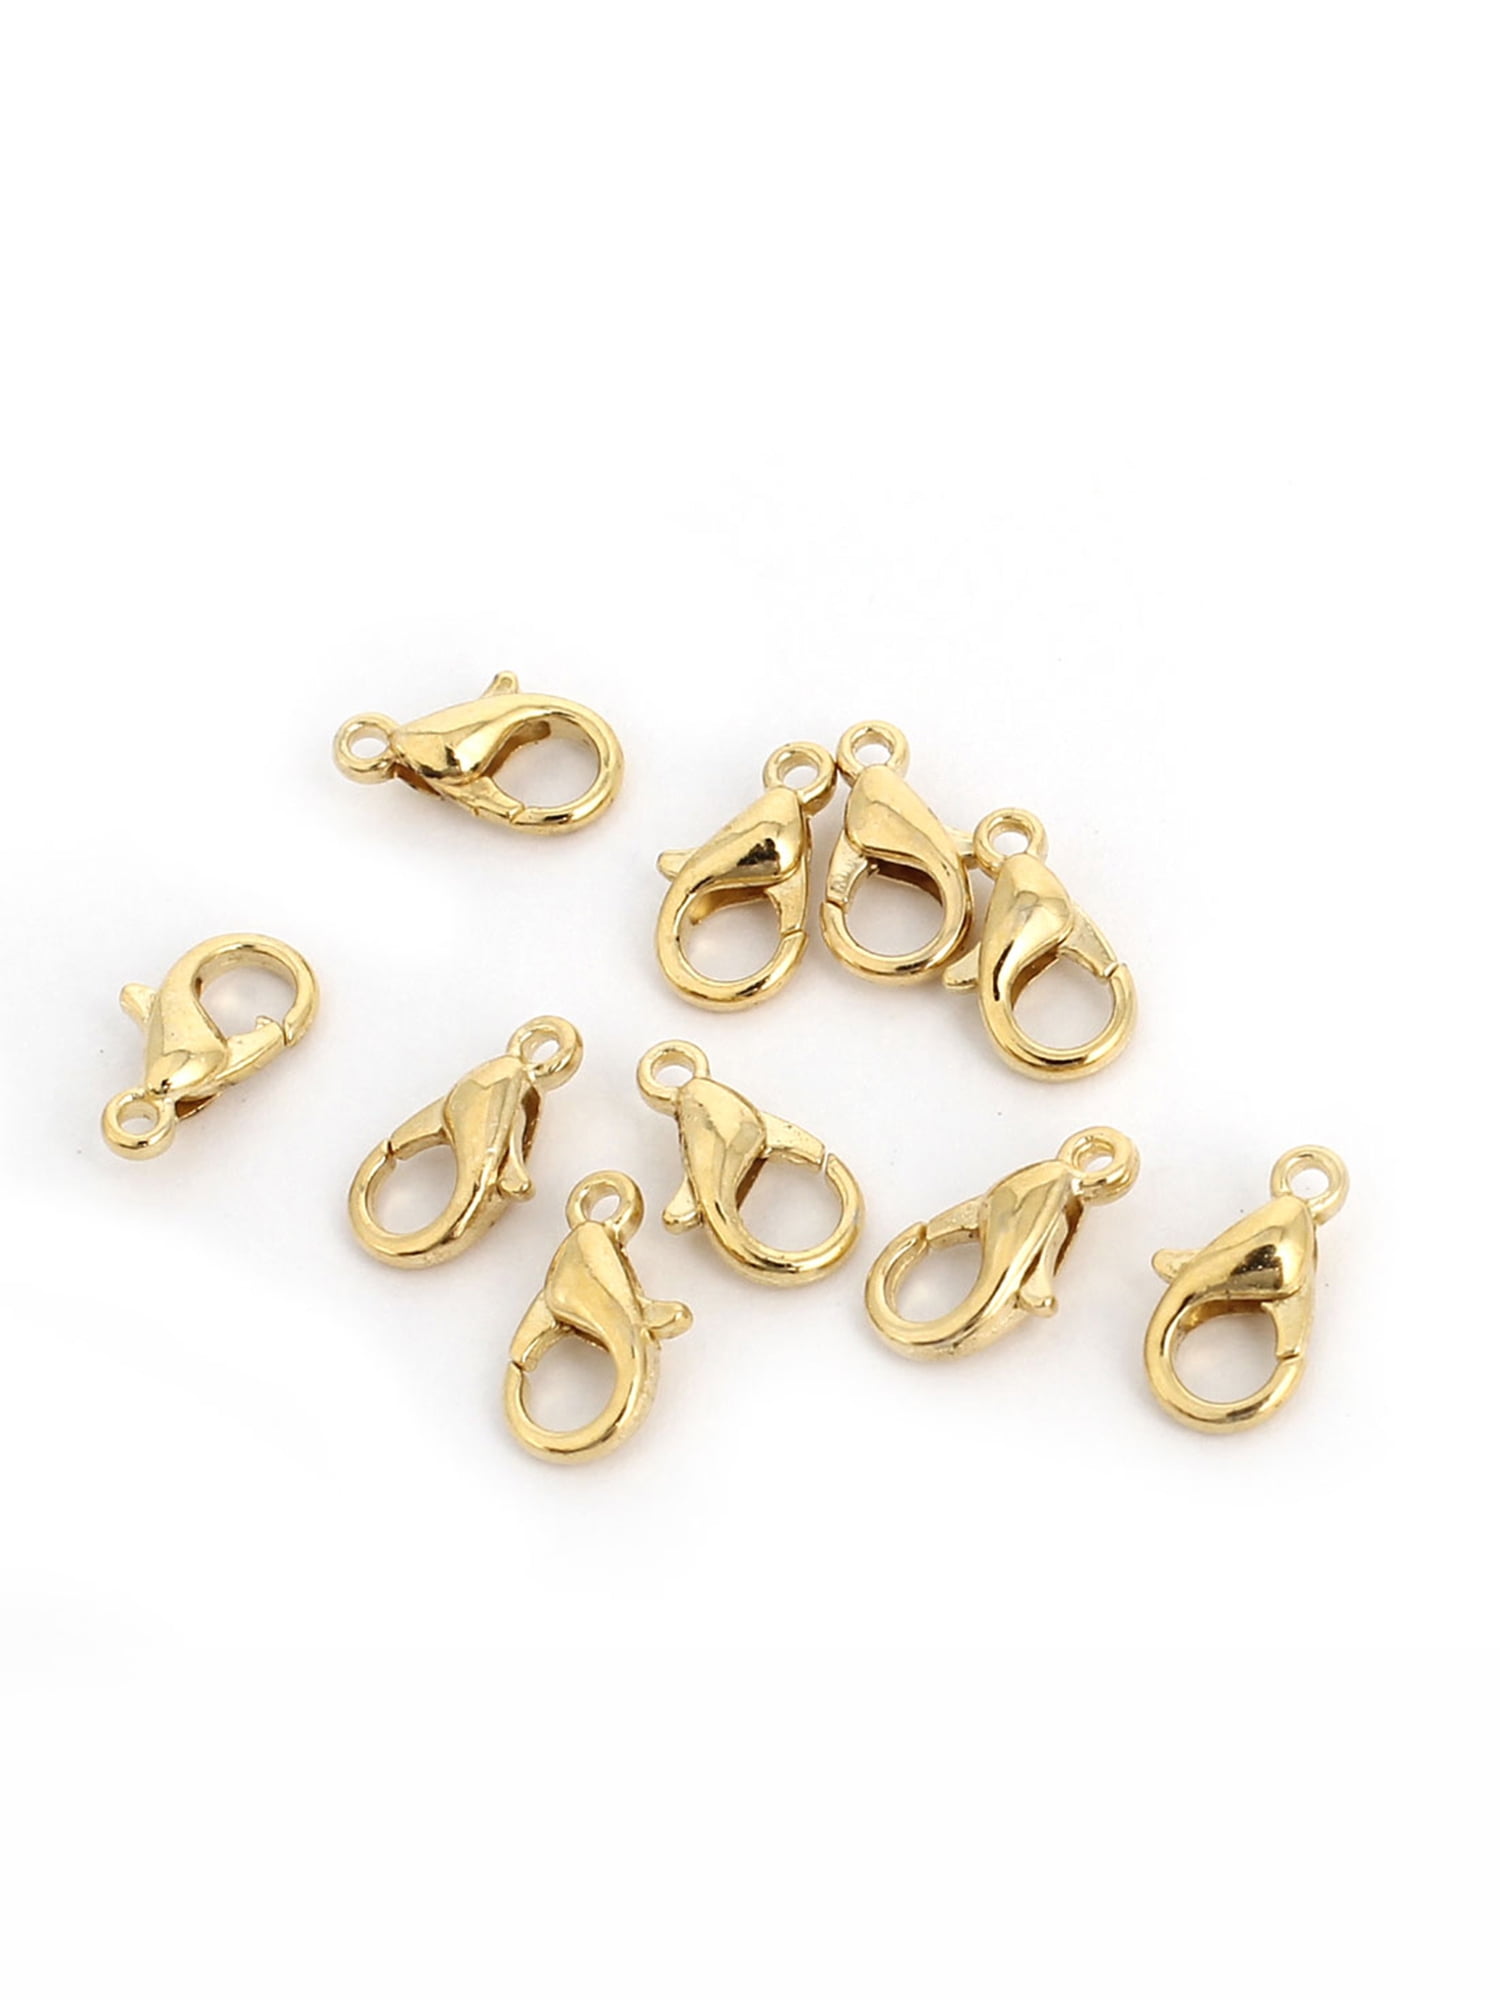 10x Gold Plated Metal Lobster Claw Clasps Clasp Hooks 10mm x 5mm Closure Parrot 